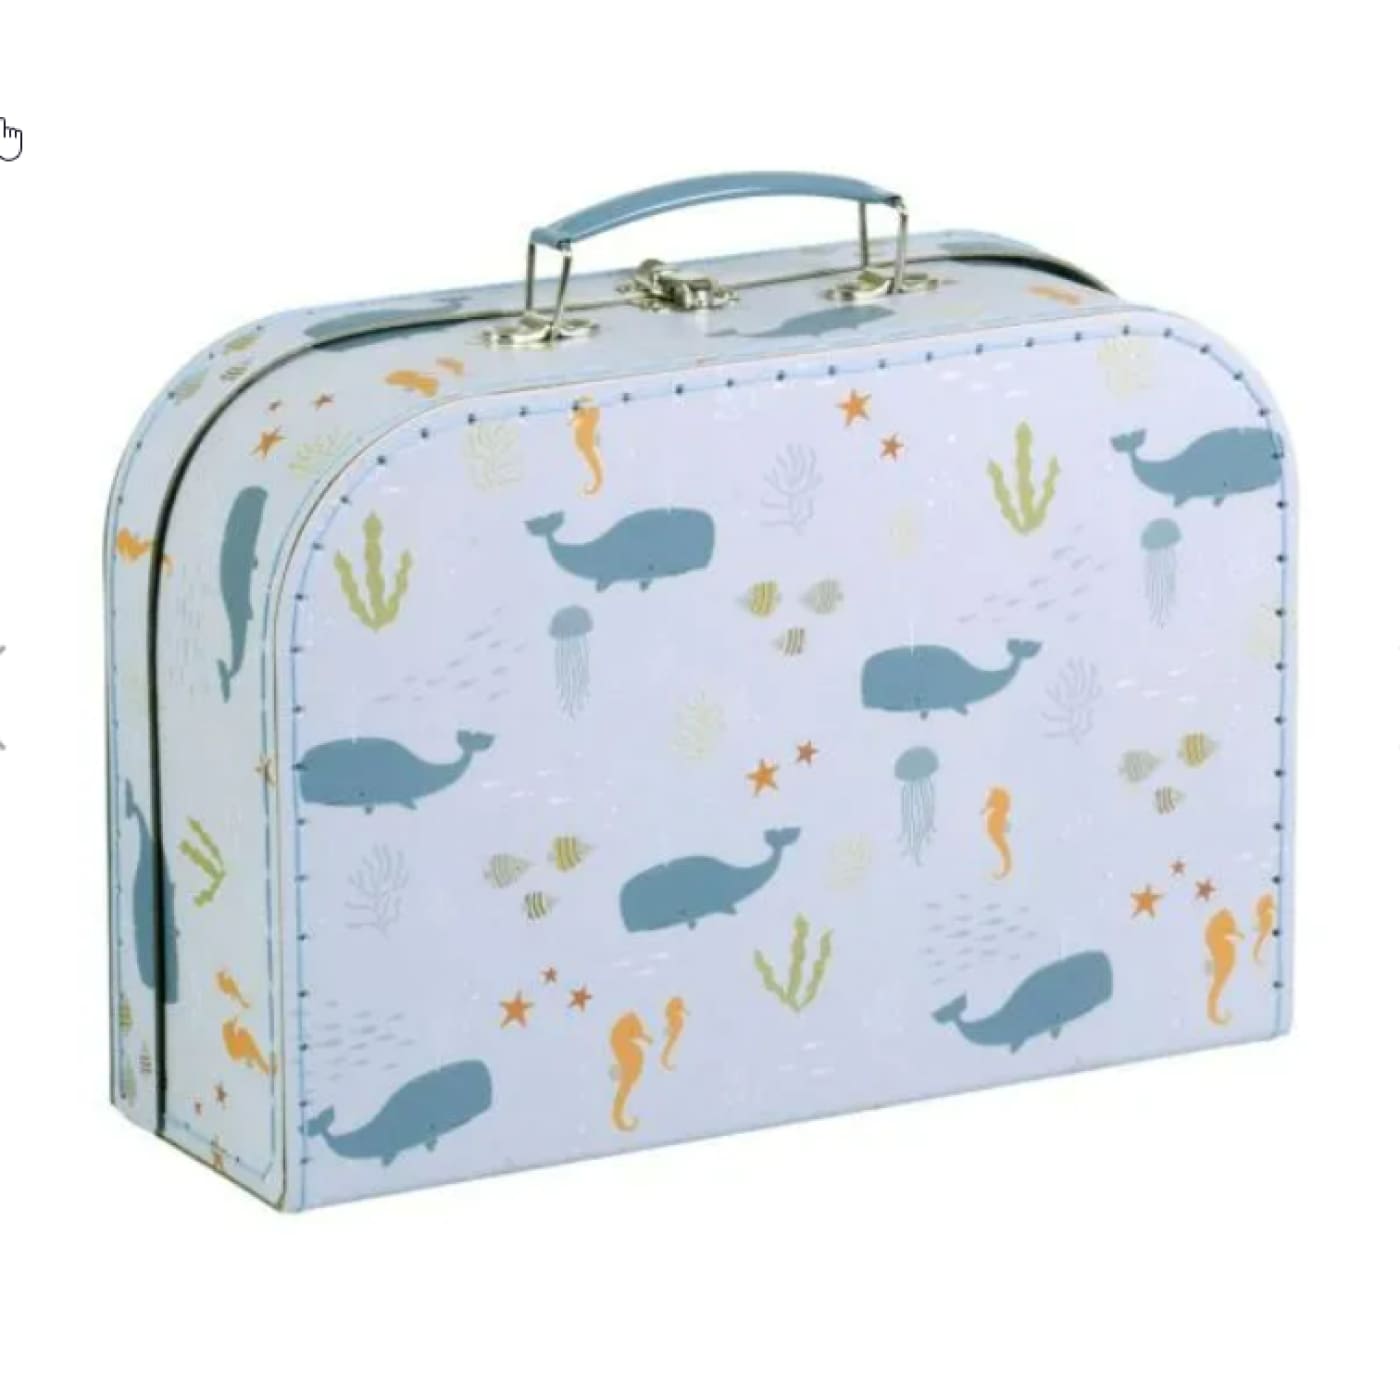 A Little Lovely Company Suitcase Large Oean - Ocean - GIFTWARE - KEEPSAKES